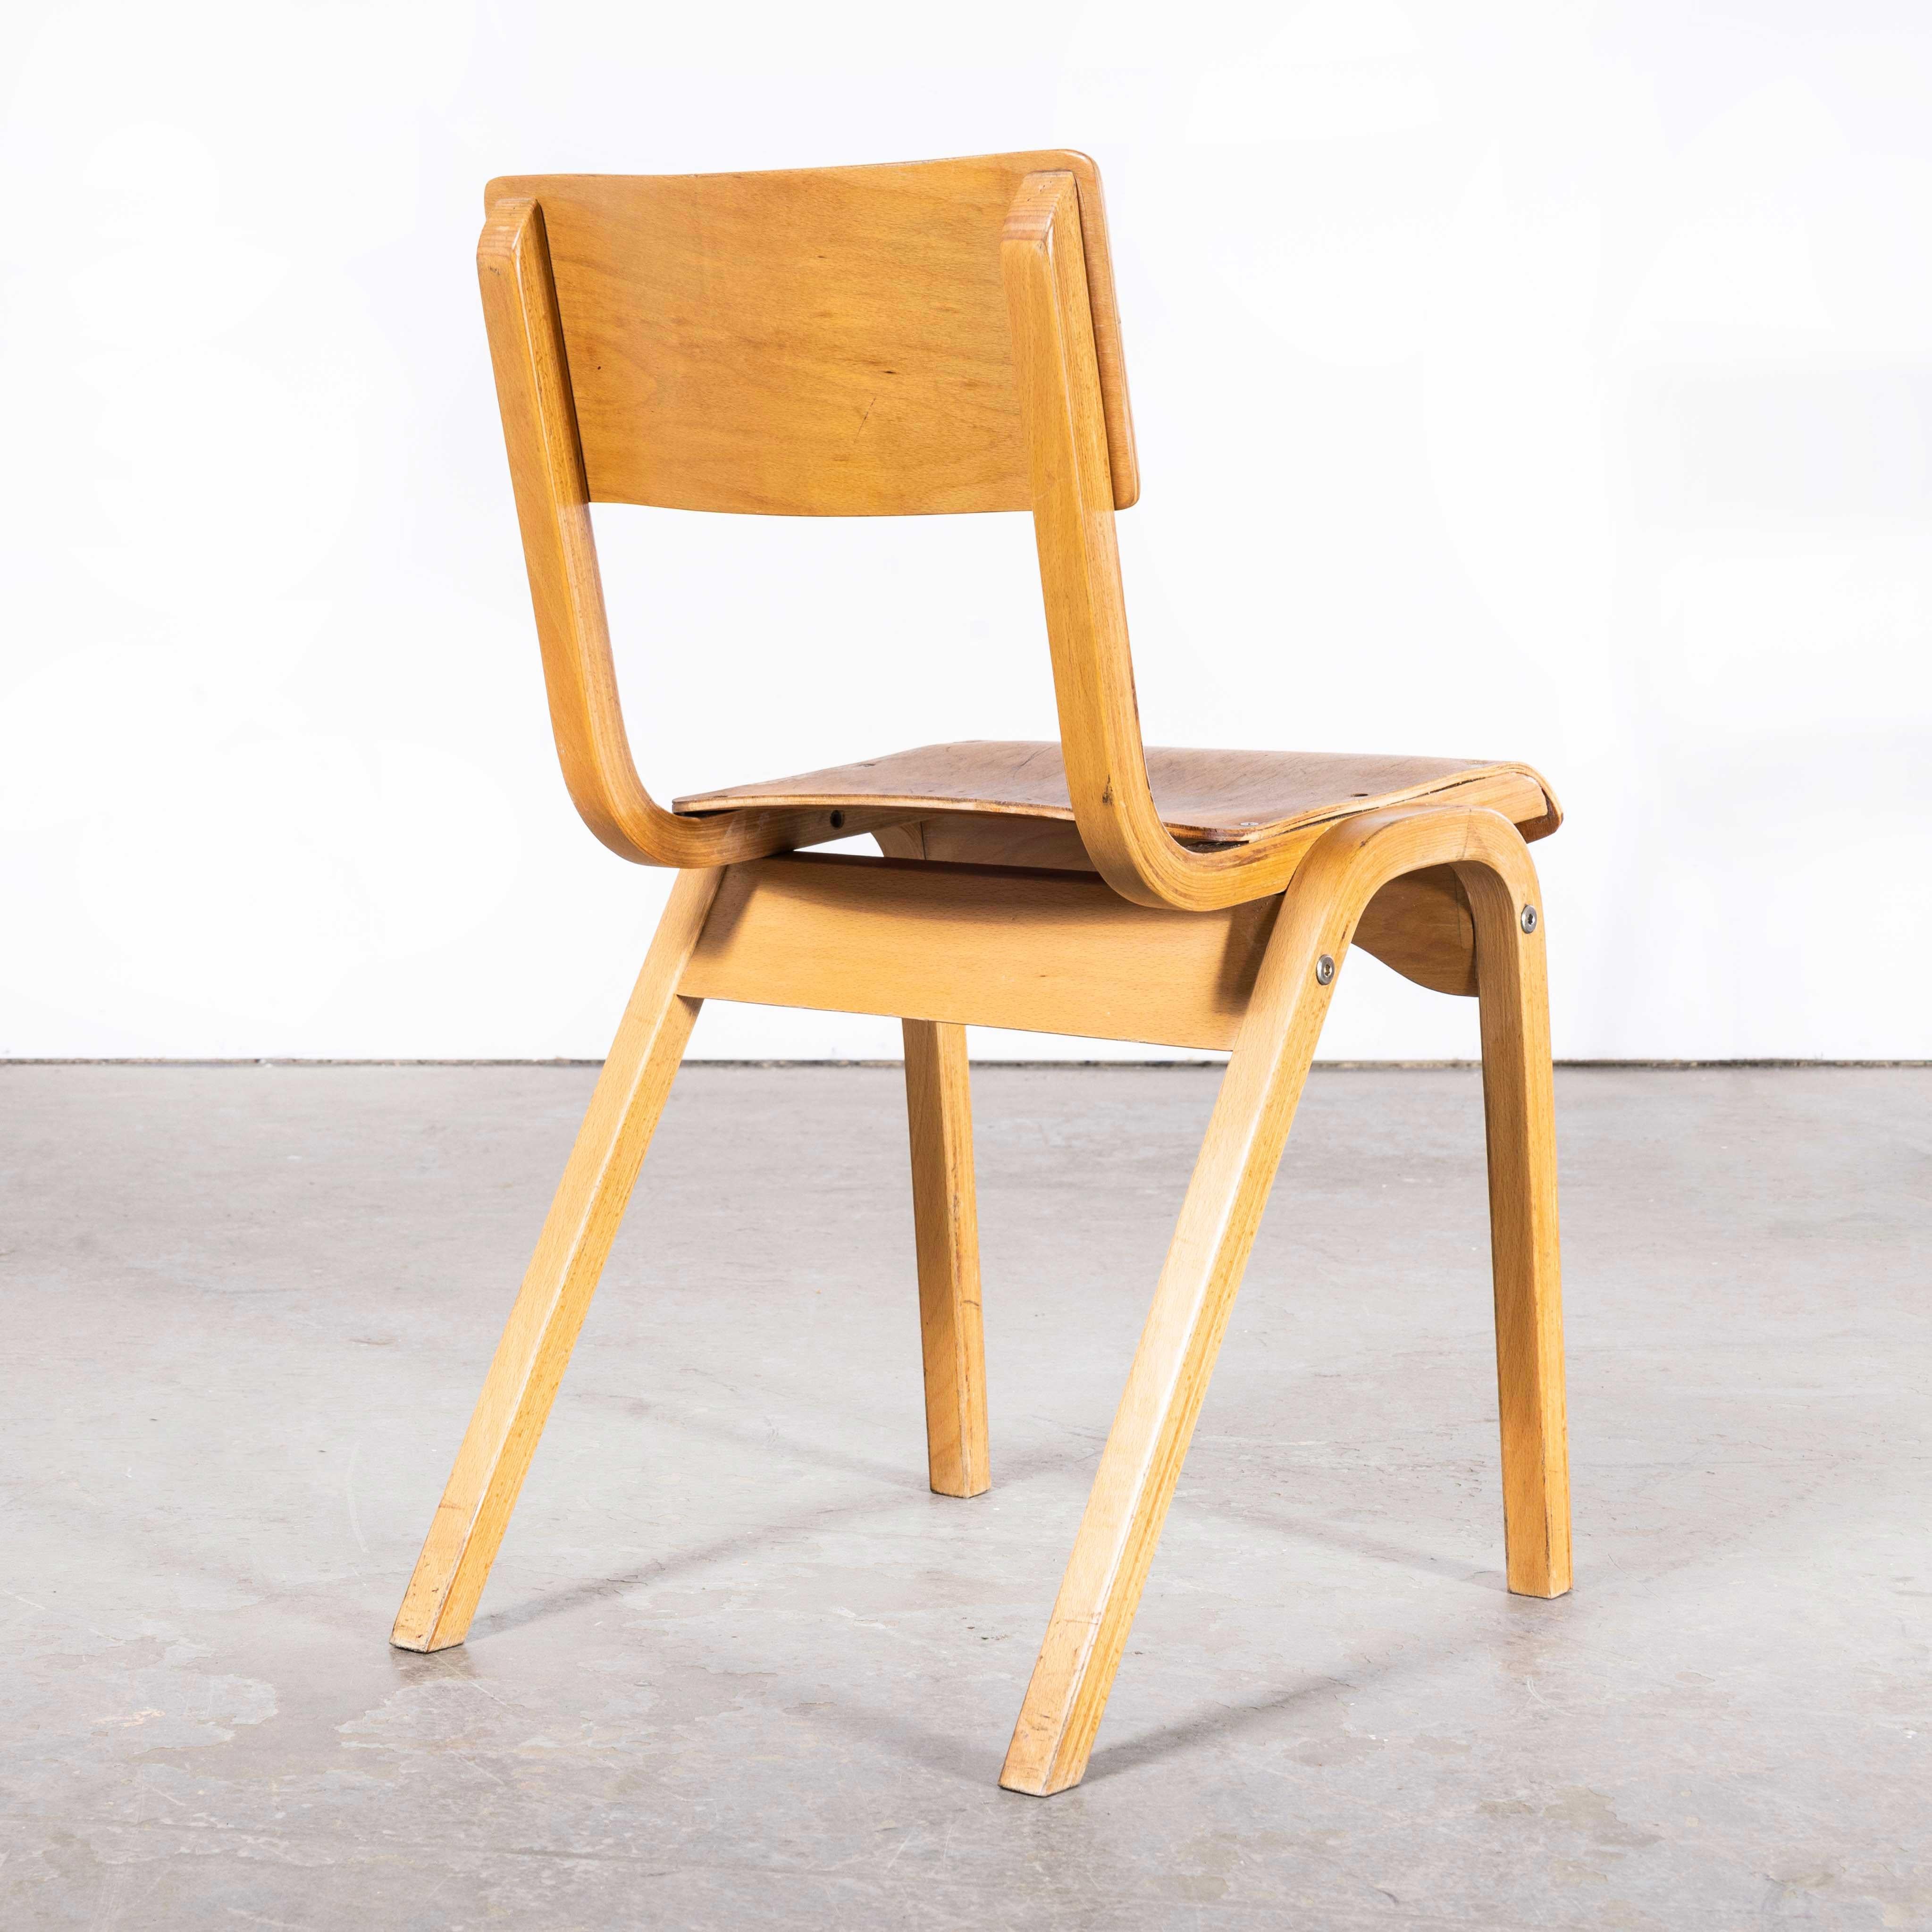 1950’s Lamstak Beech Stacking Dining Chairs – Set Of Eighteen
1950’s Lamstak Beech Stacking Dining Chairs – Set Of Eighteen. This is one of our favourite models of chairs. Designed de by Lamstak it was an iconic school, Church, community chair of